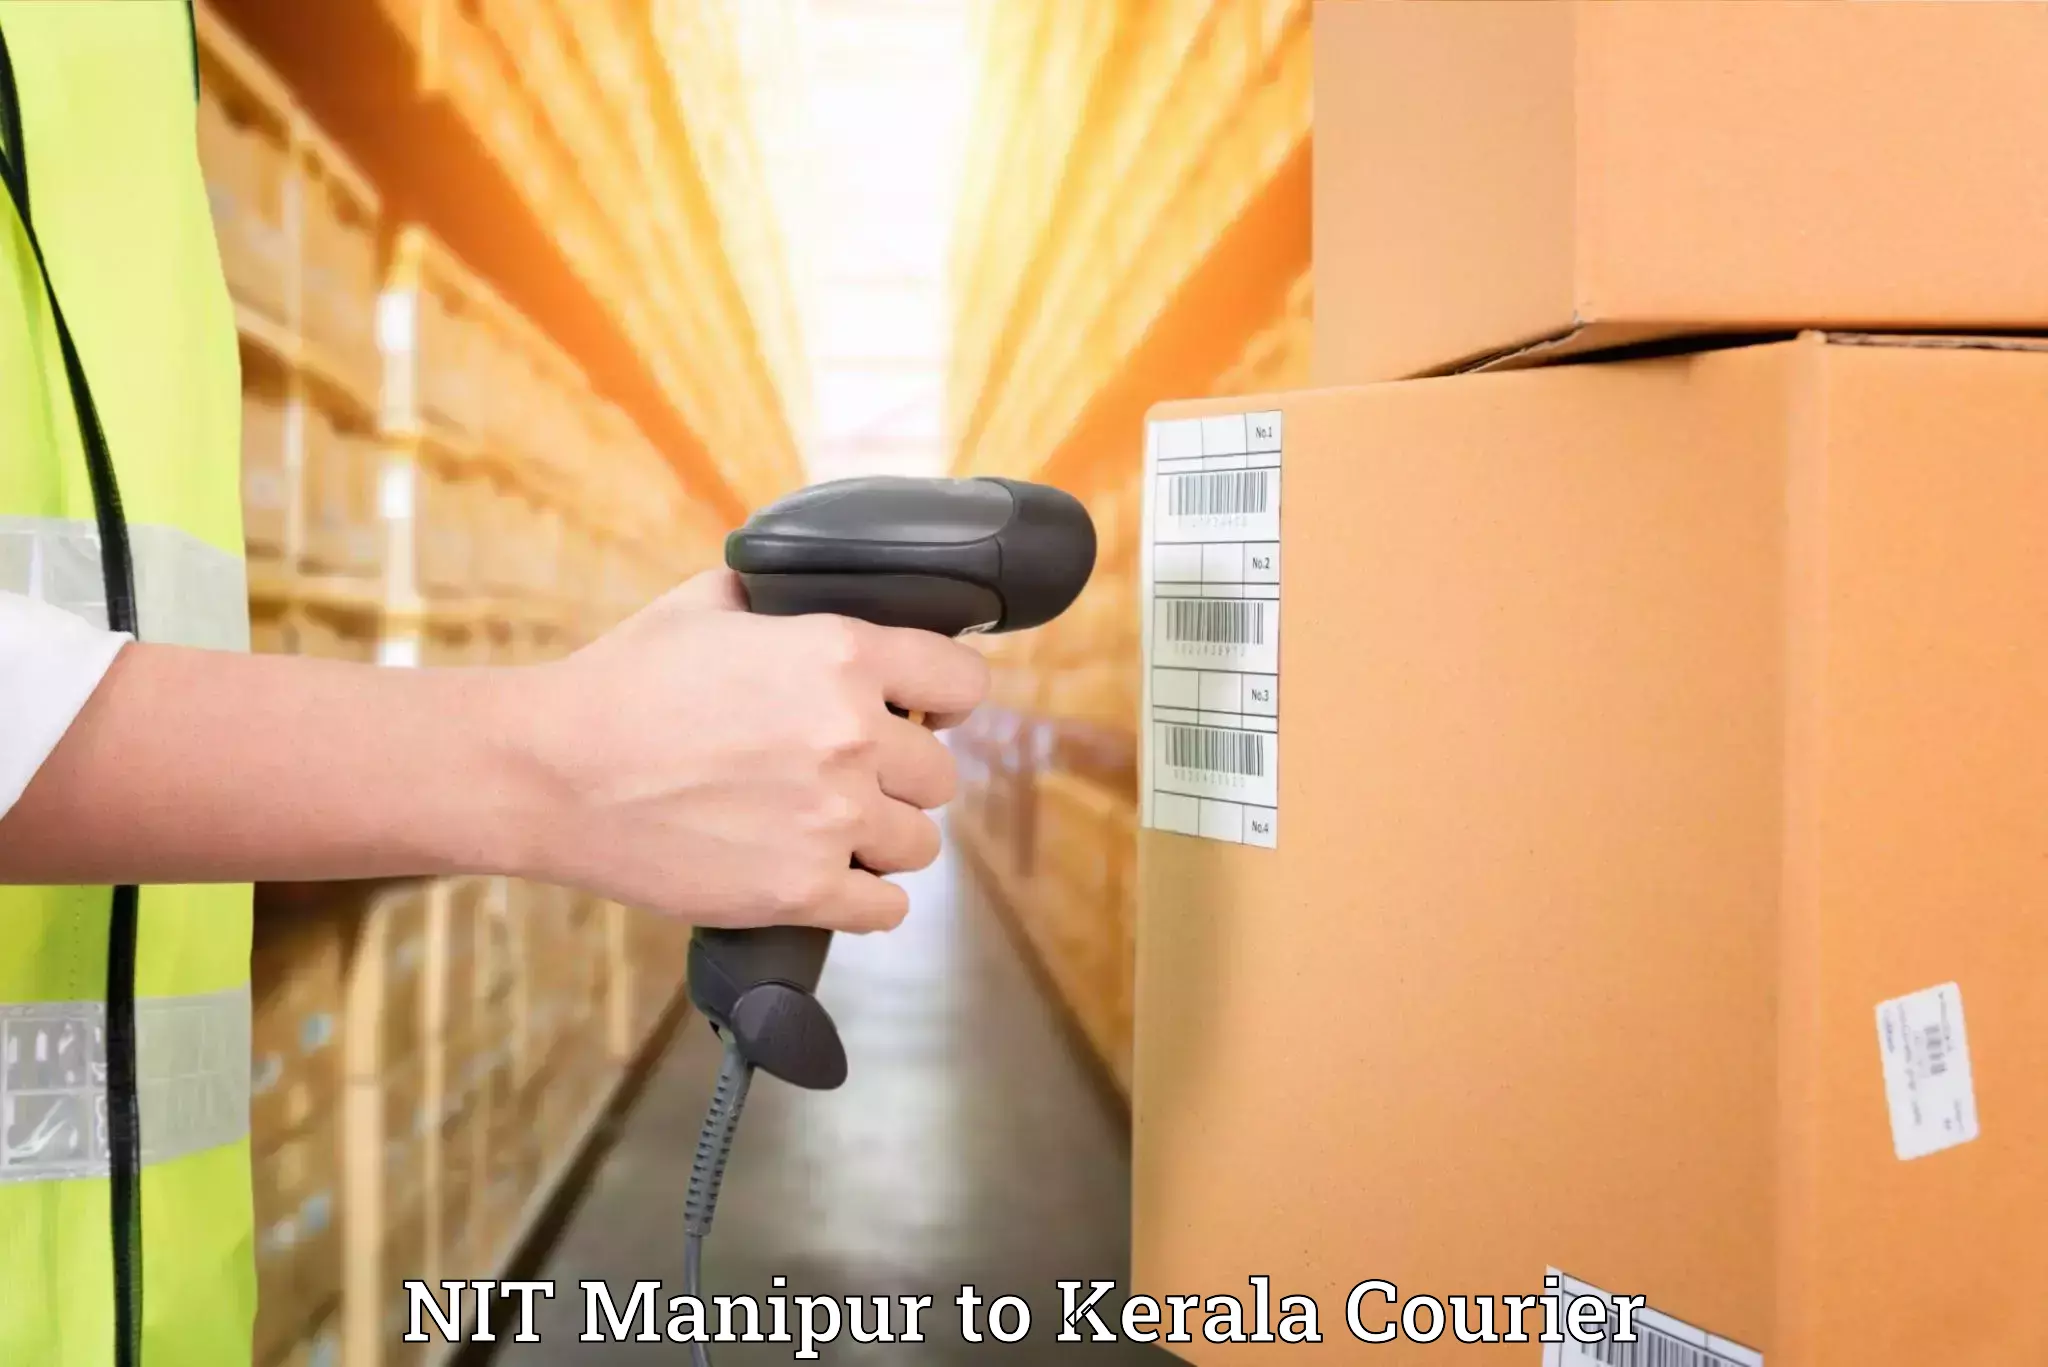 Quality moving and storage NIT Manipur to Kerala